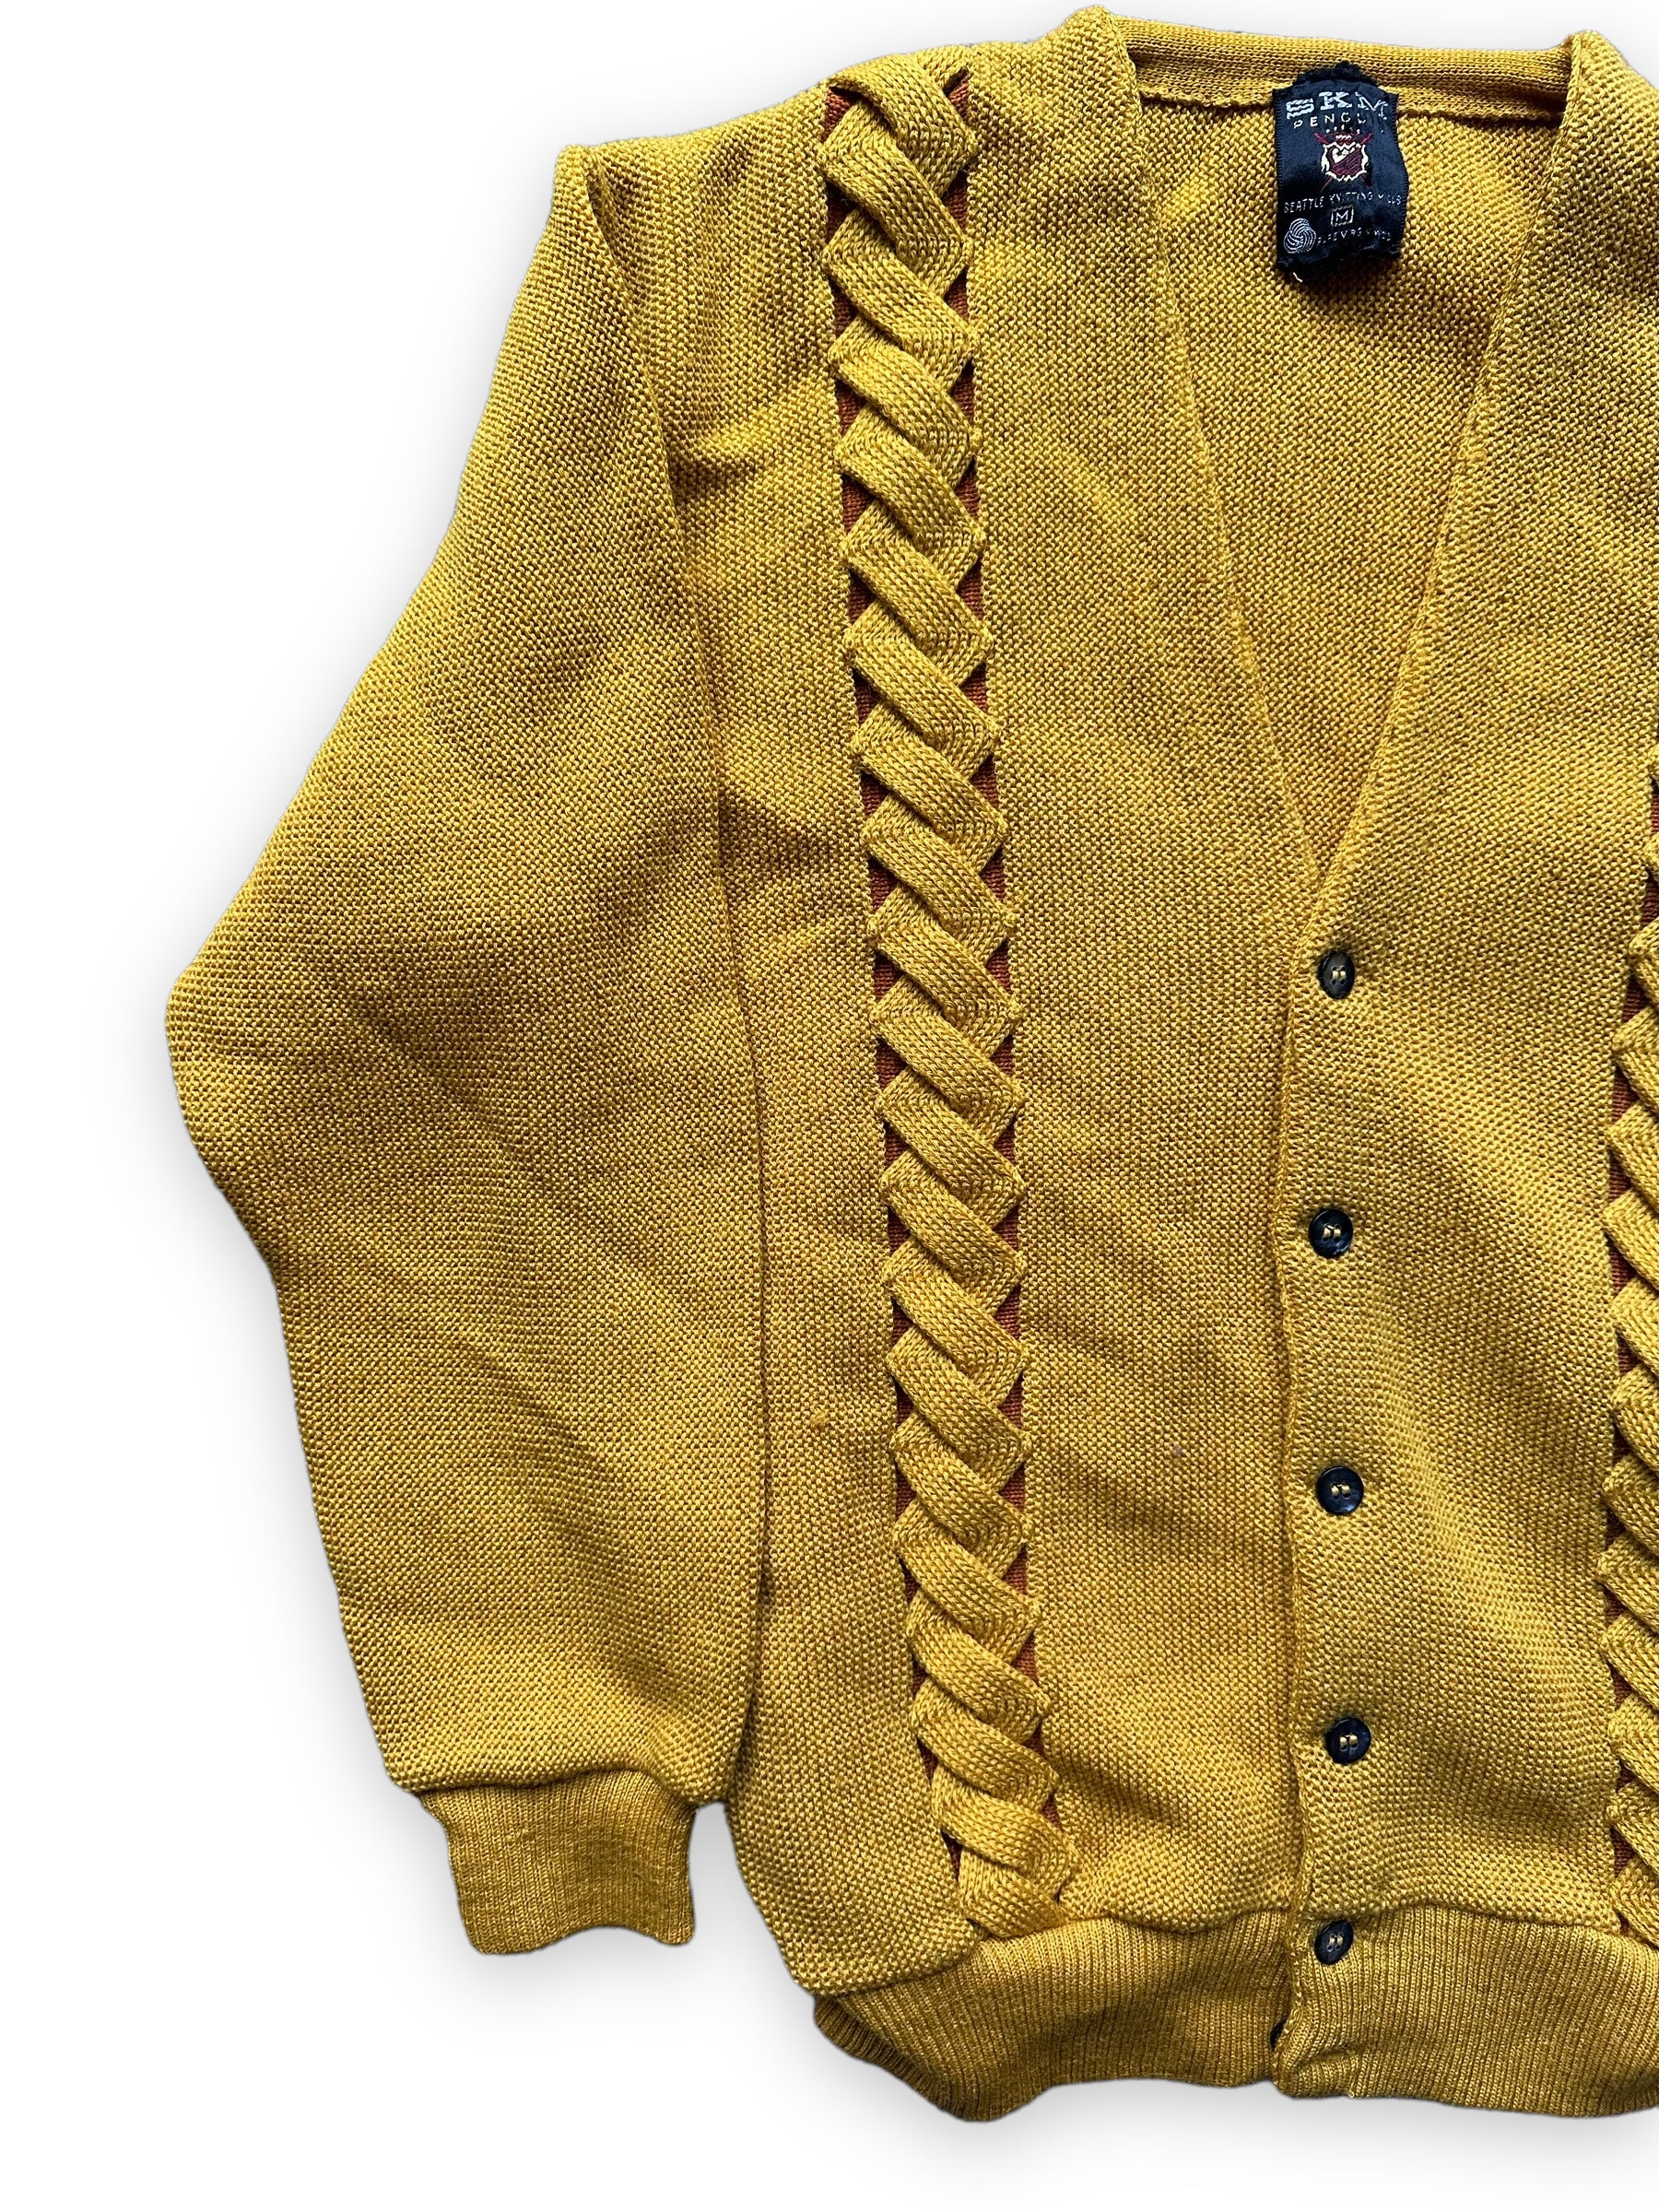 Front Right Flat View of Vintage Seattle Knitting Mills Golden Double Helix Wool Sweater SZ M |  Vintage Cardigan Sweaters Seattle | Barn Owl Vintage Seattle